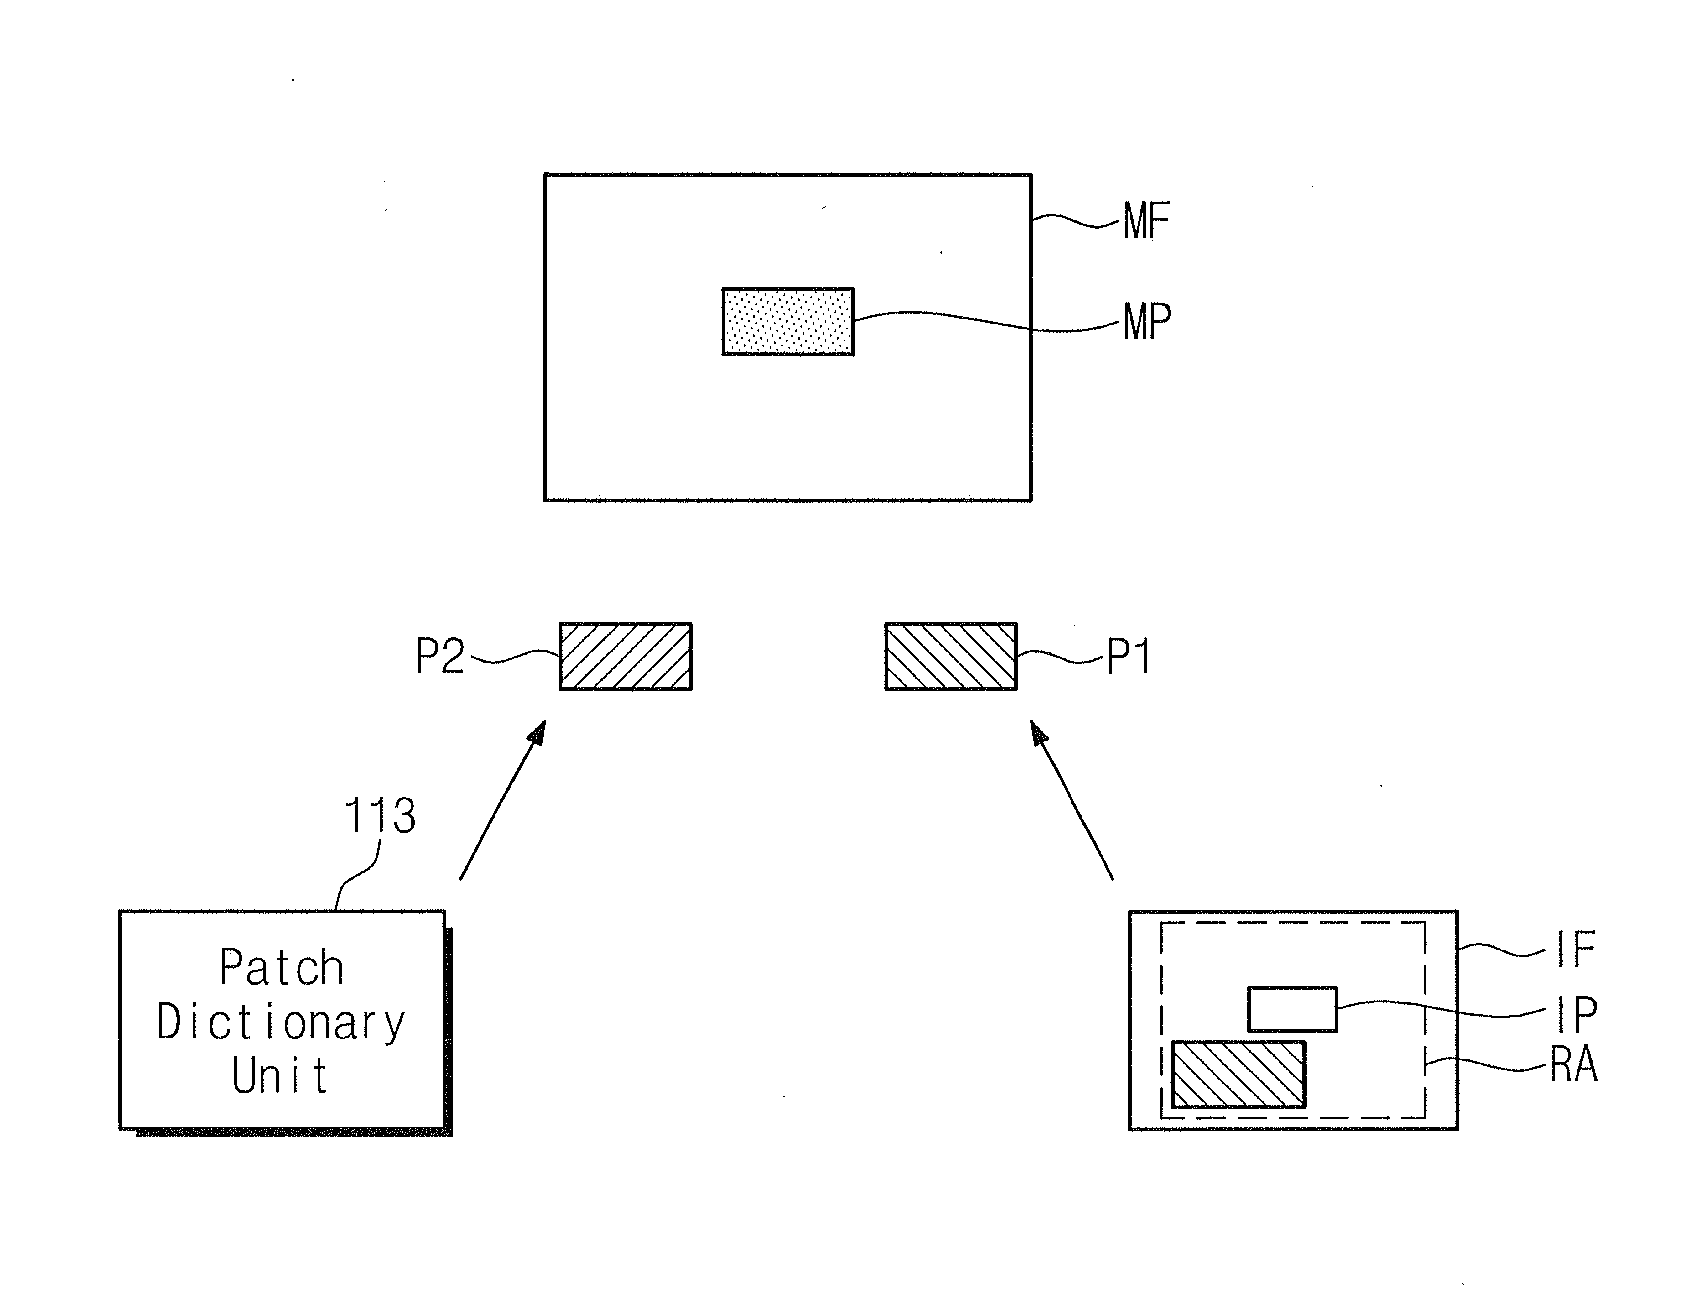 Image processor for and method of upscaling and denoising using contextual video information